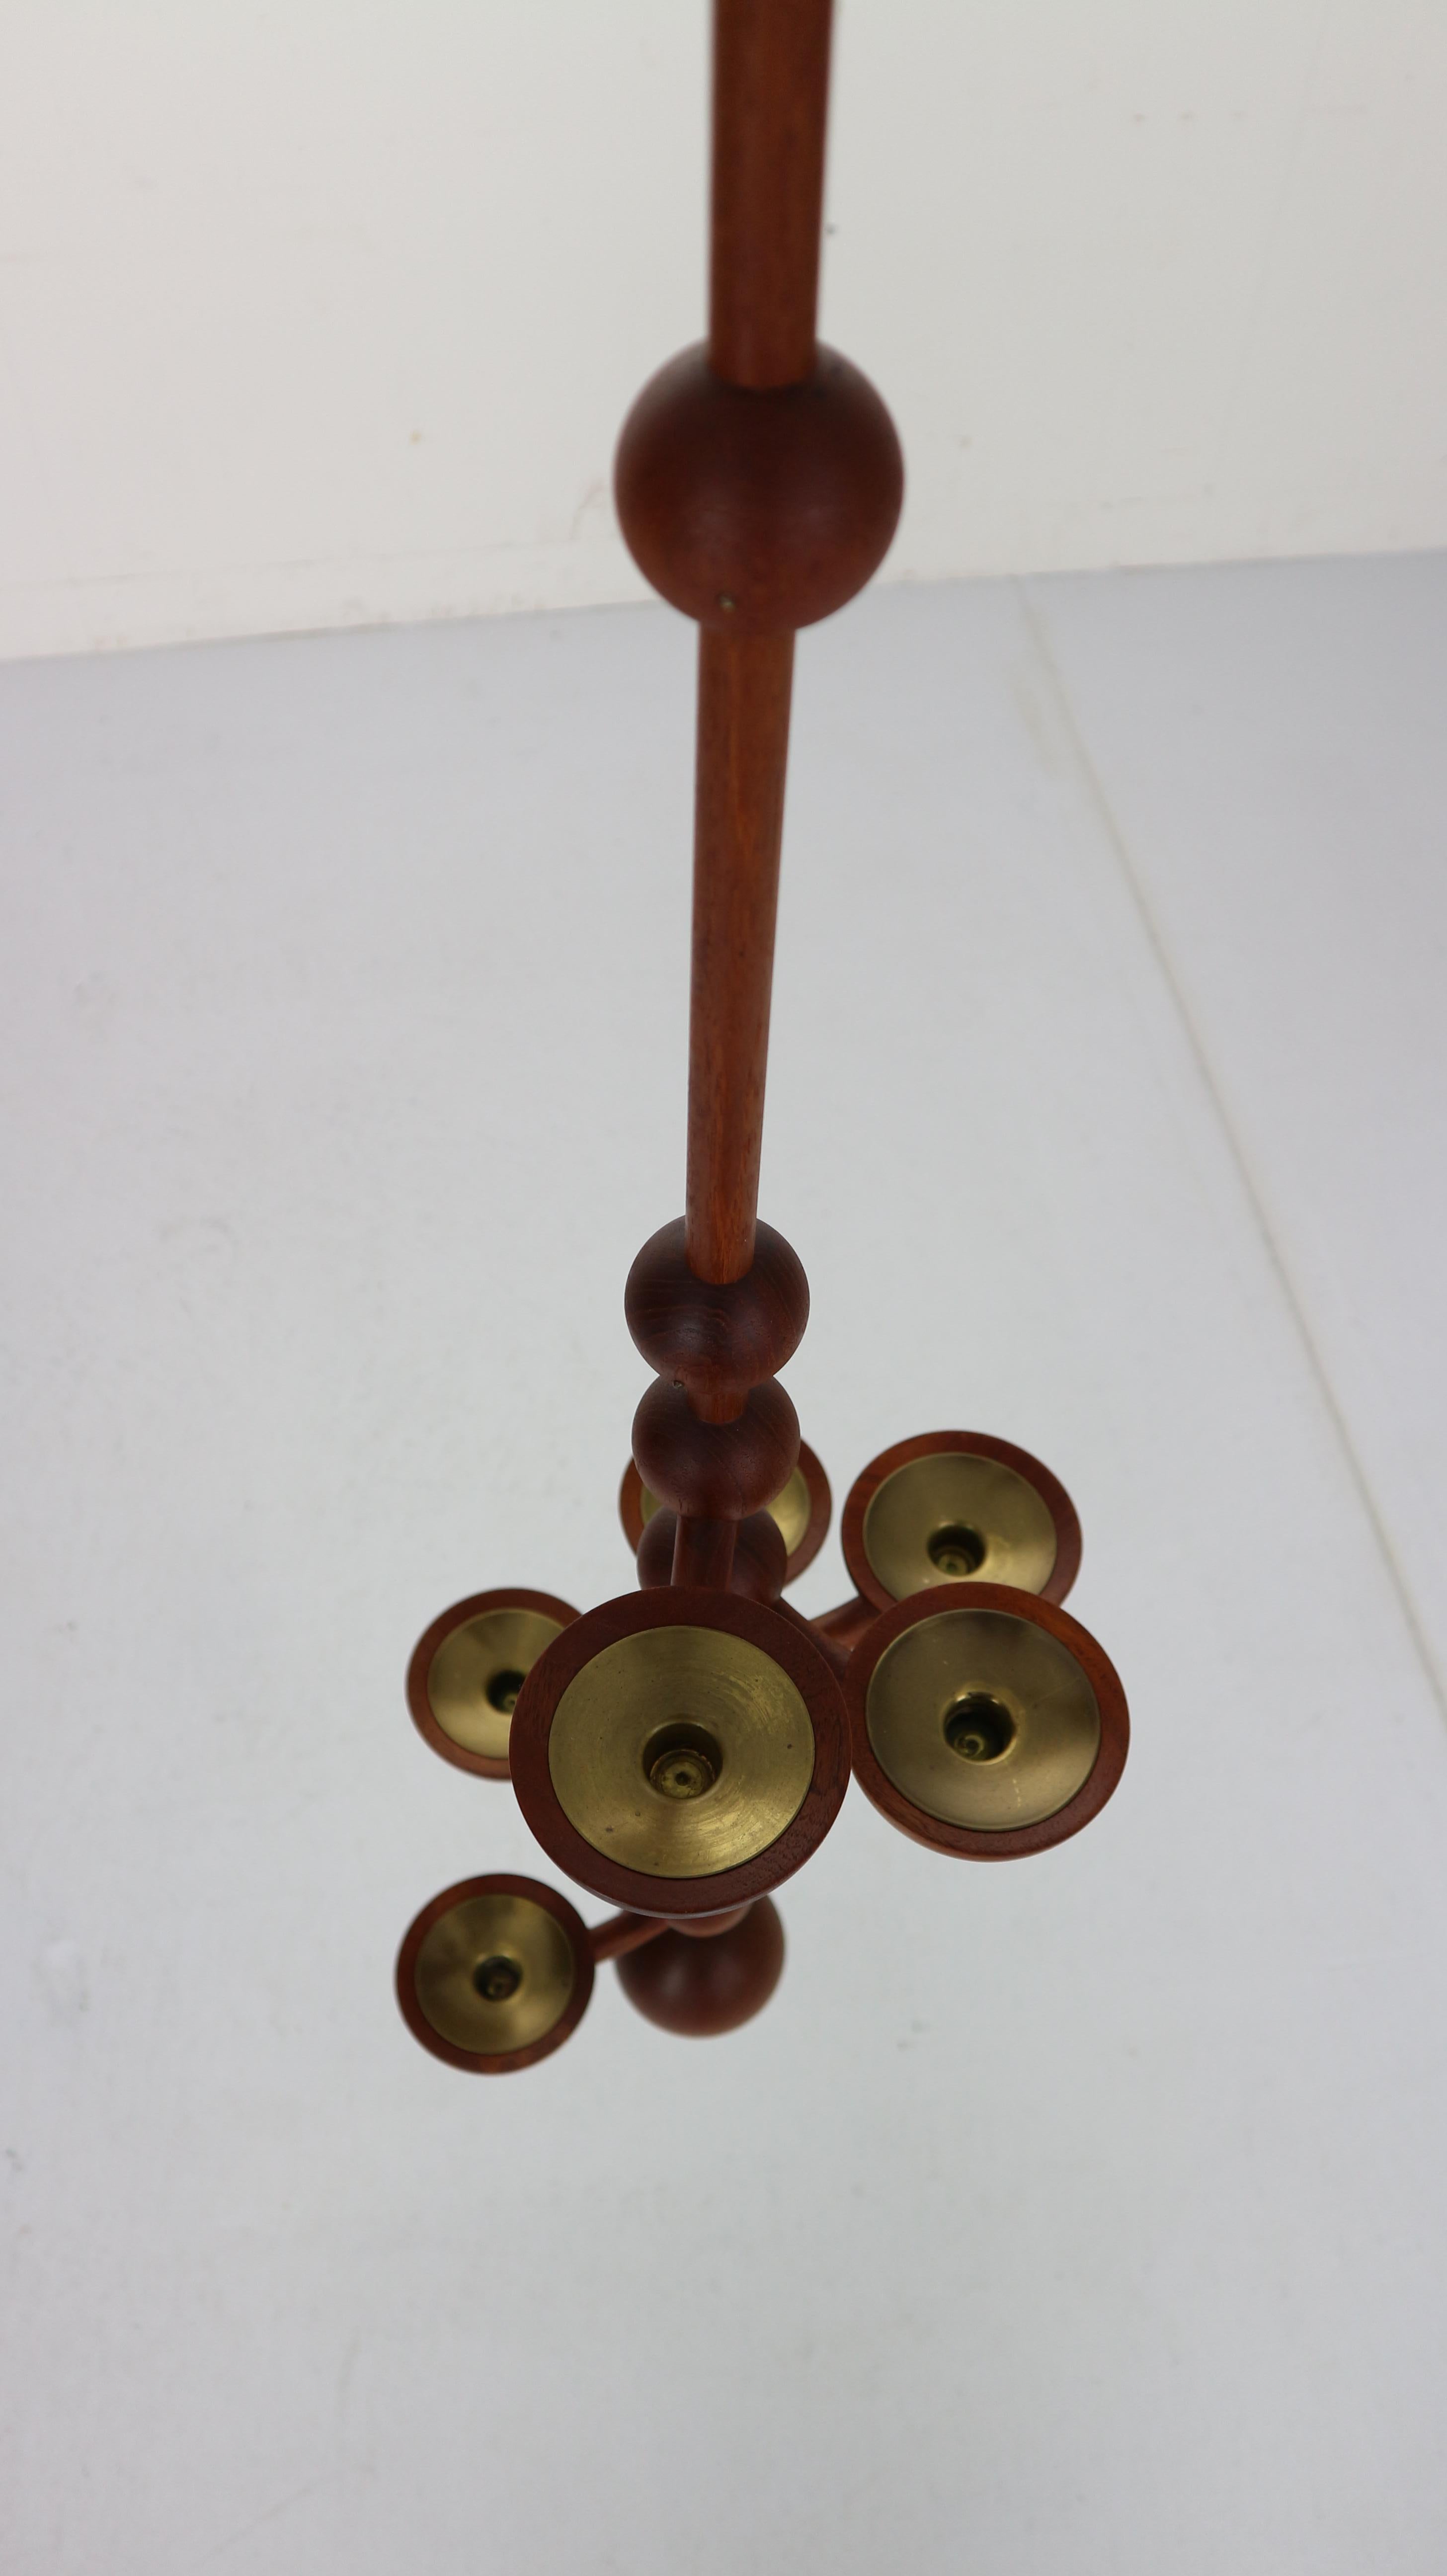 An unique and beautiful candelabra from Denmark made in 1960s period. The candelabra is meant to be hung like a mobile of candle light.
Made from solid teak wood and six brass candle holders for regular size candles.
      